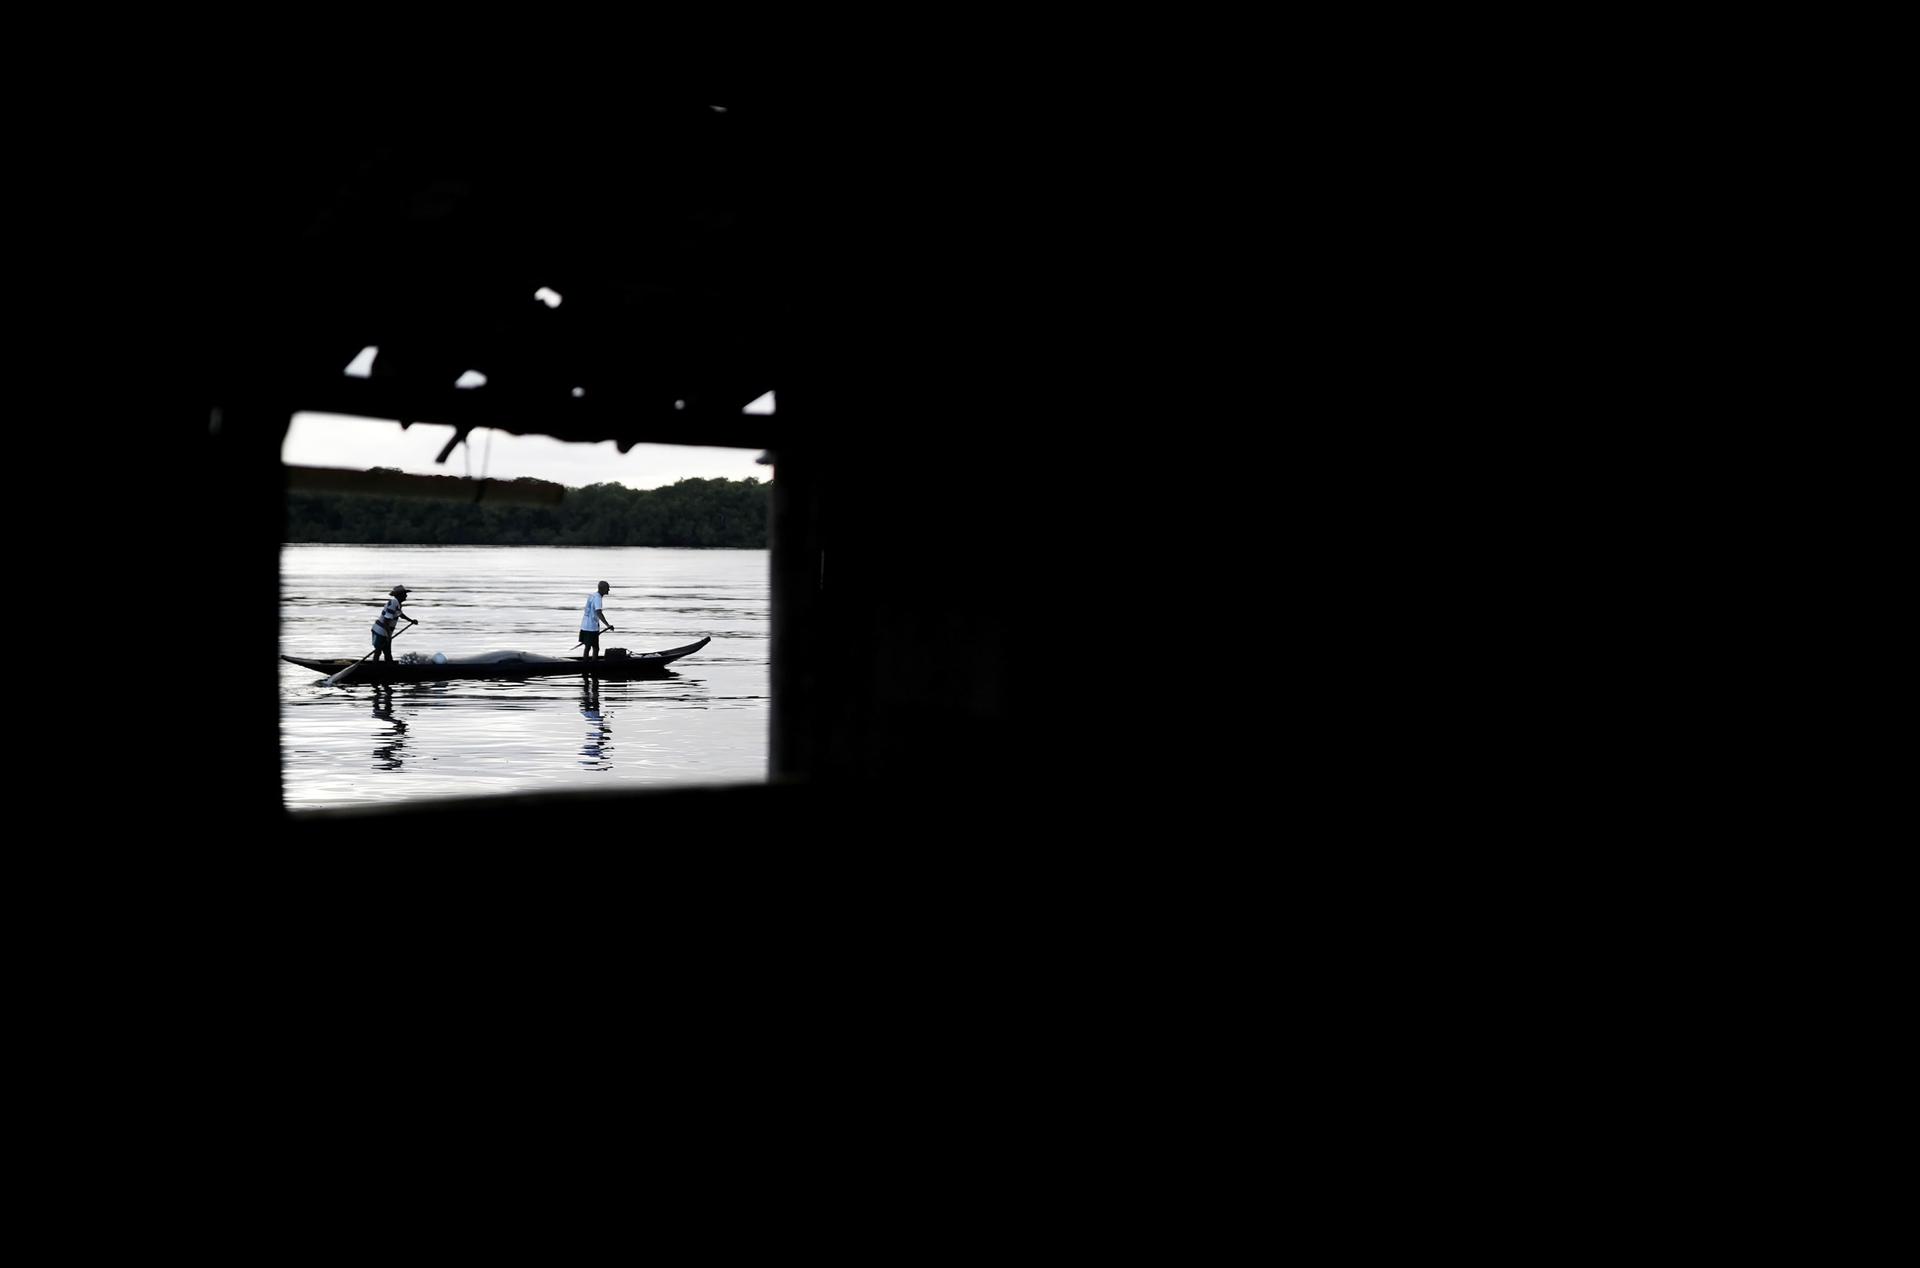 A dark photograph with a bright window showing people on a boat.